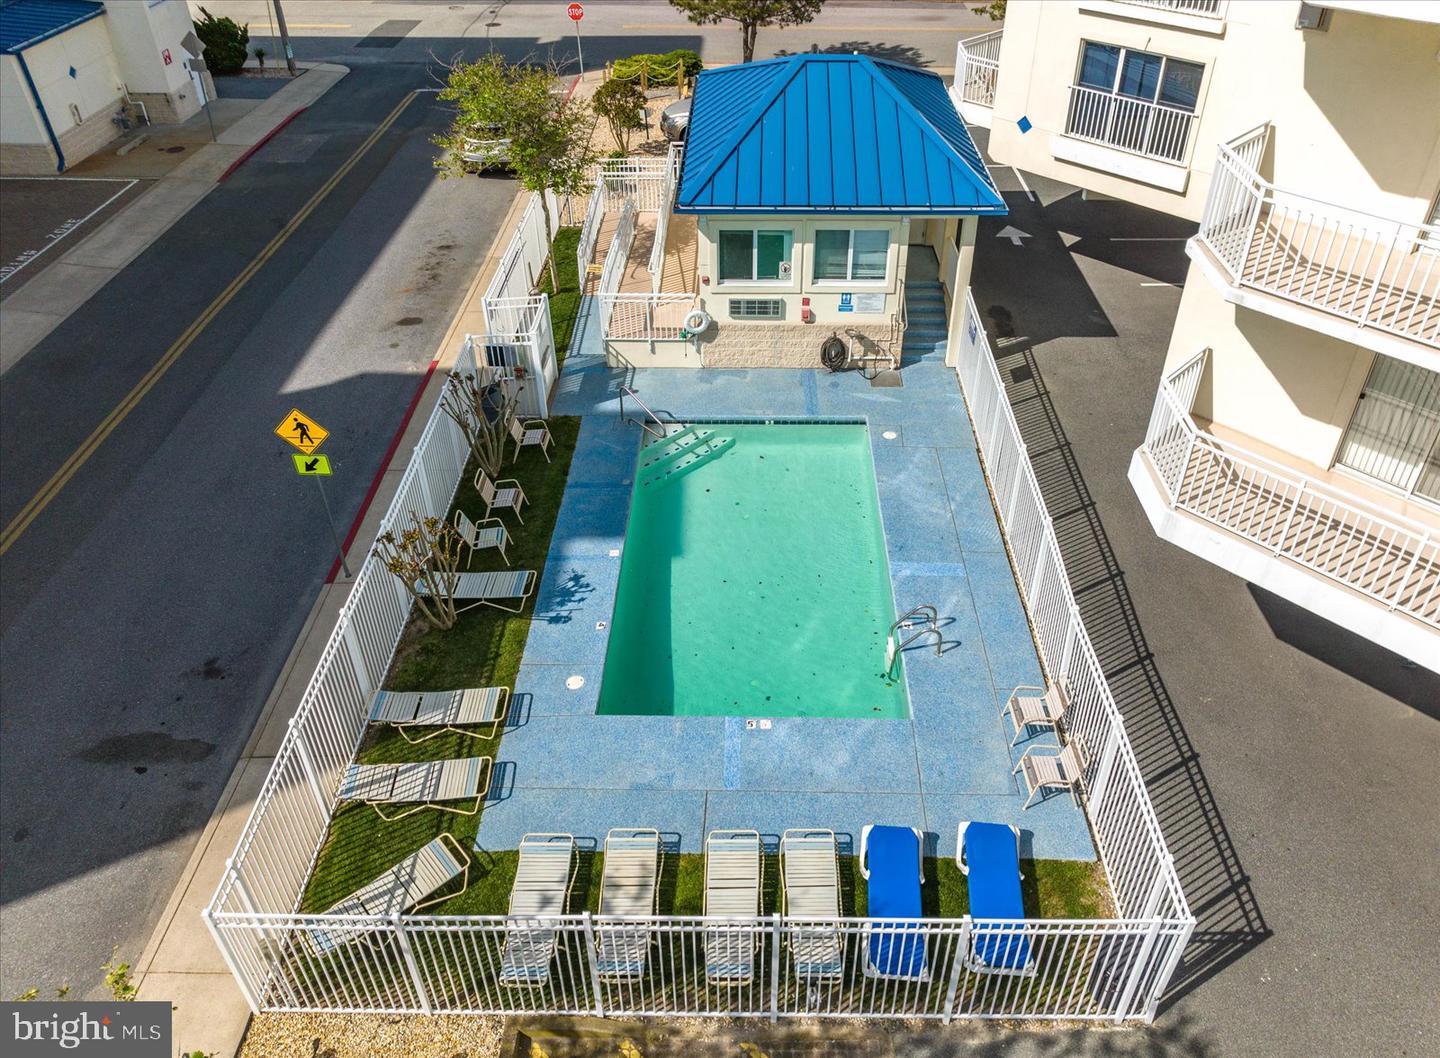 MDWO2019616-802926944520-2024-03-15-14-43-39 1005 Edgewater Ave #102 | Ocean City, MD Real Estate For Sale | MLS# Mdwo2019616  - 1st Choice Properties